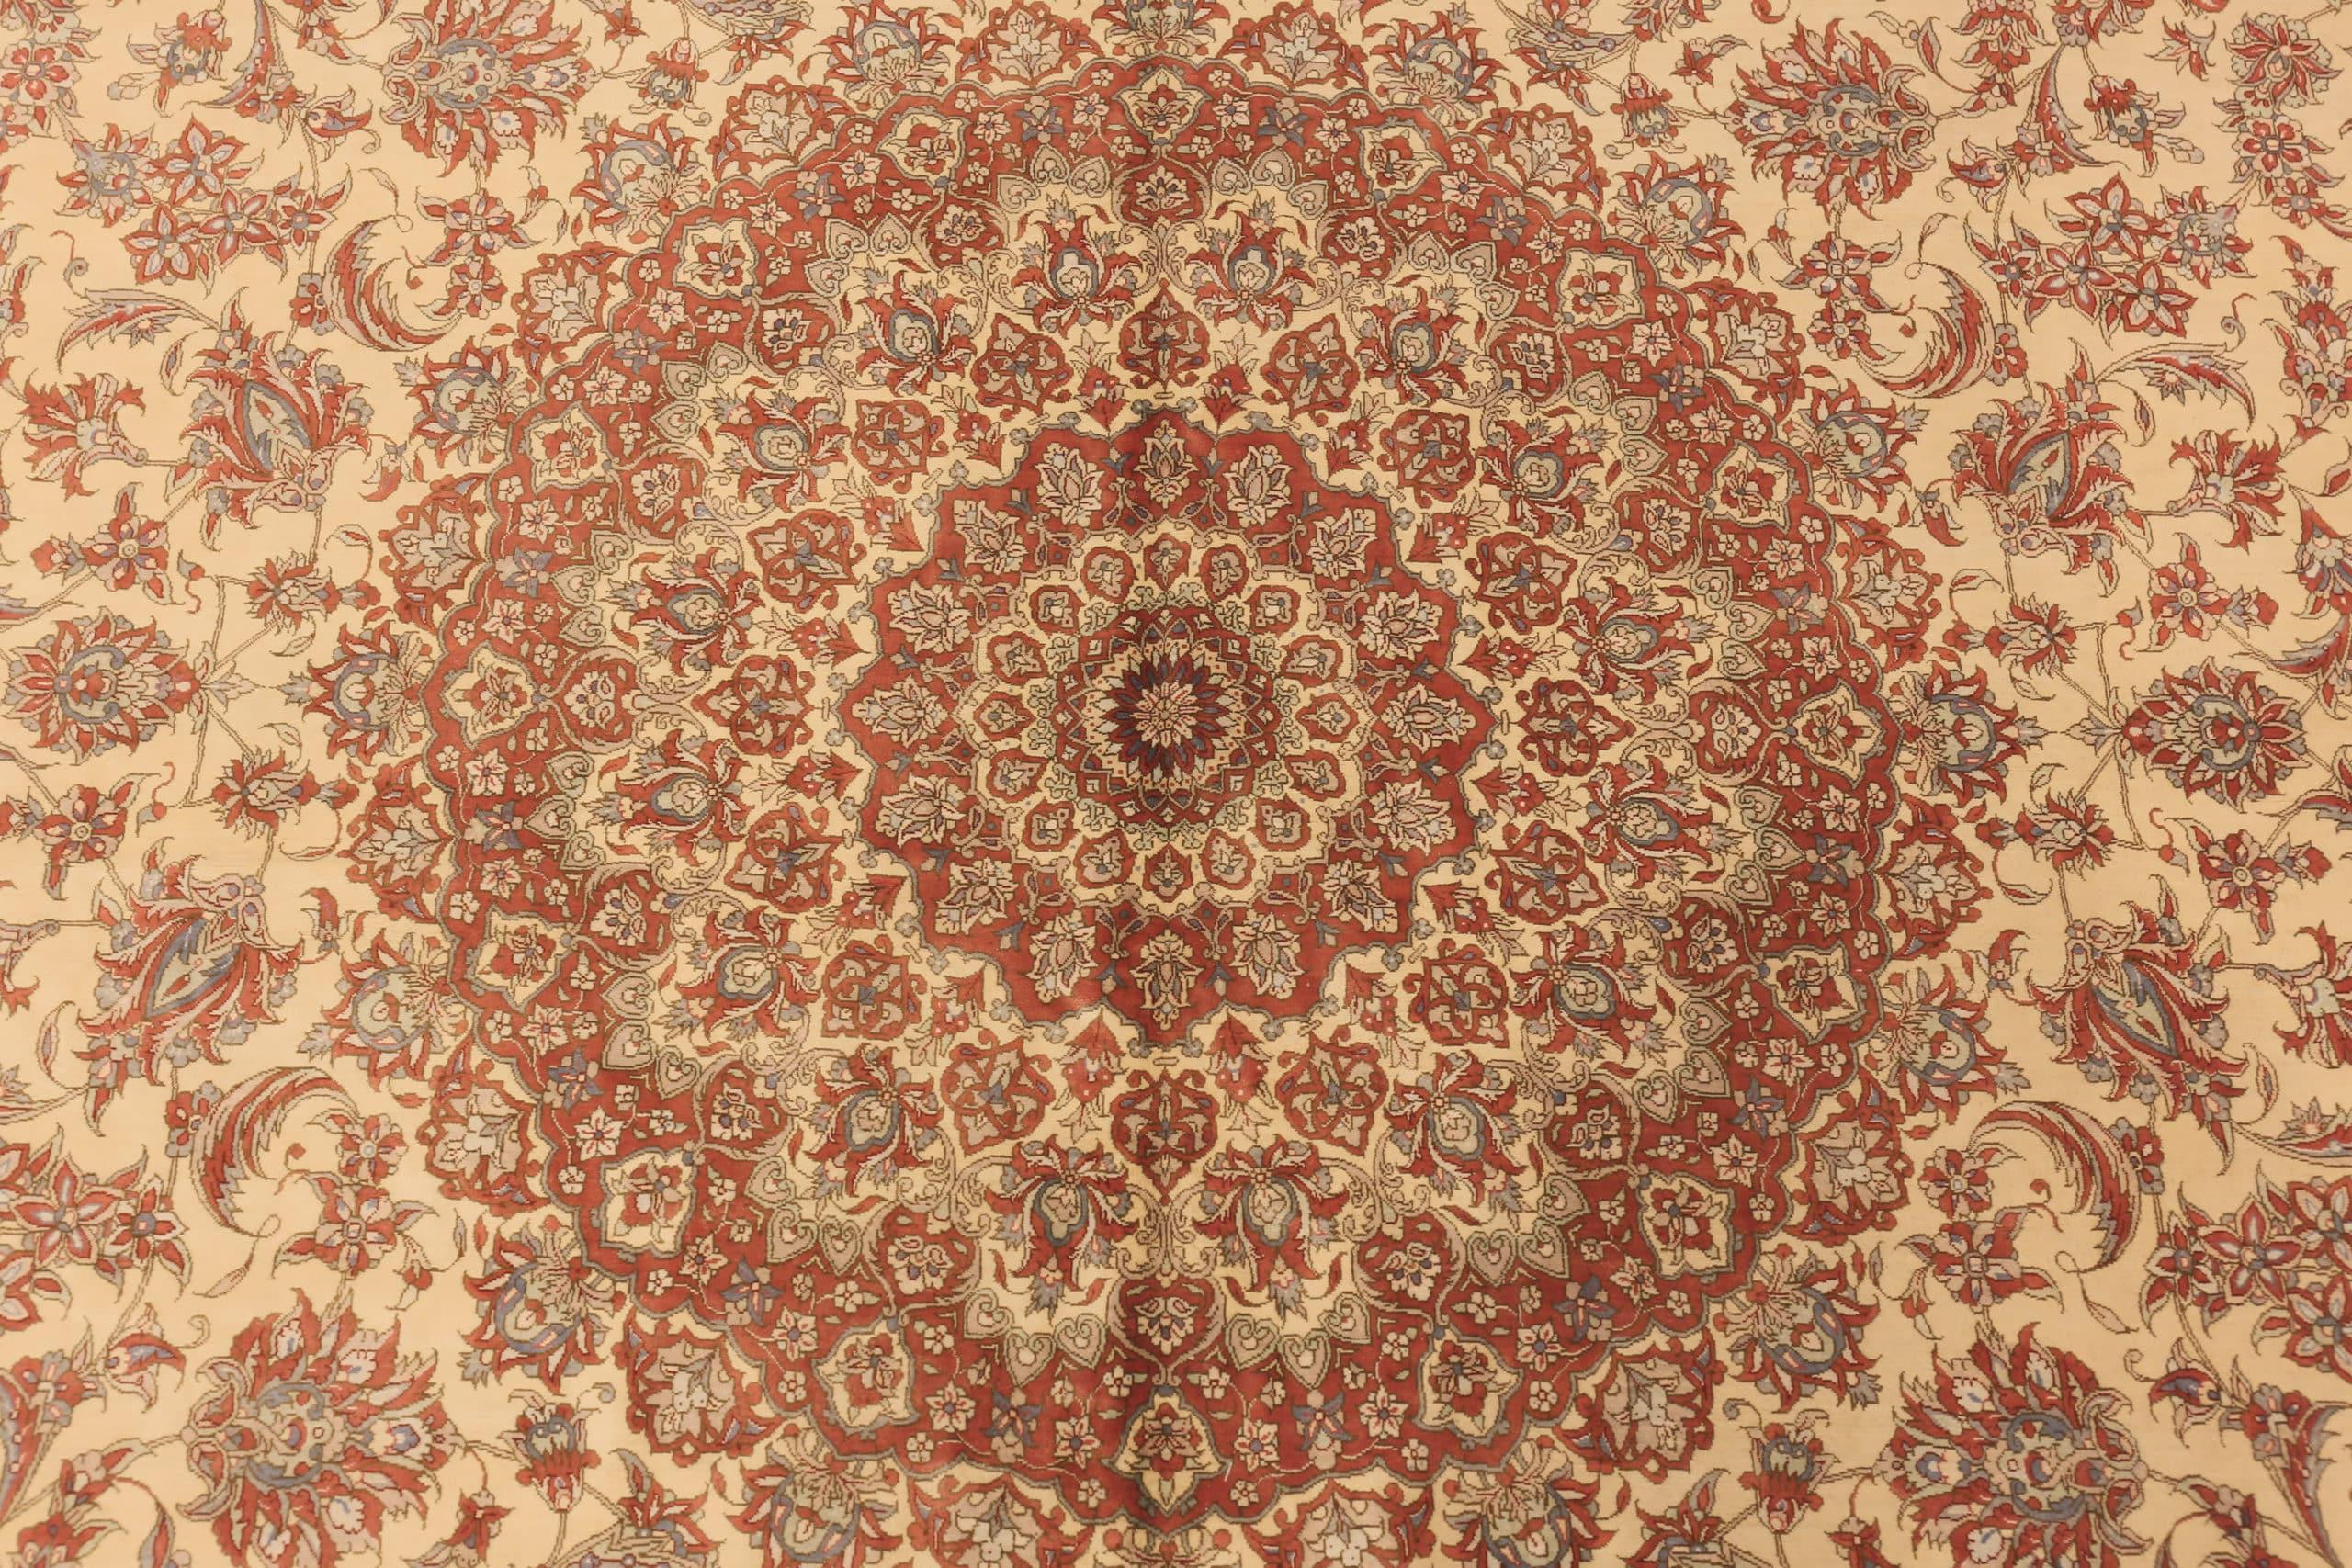 Hand-Knotted Beautiful Fine Room Size Vintage Persian Silk Qum Rug 10' x 13'4